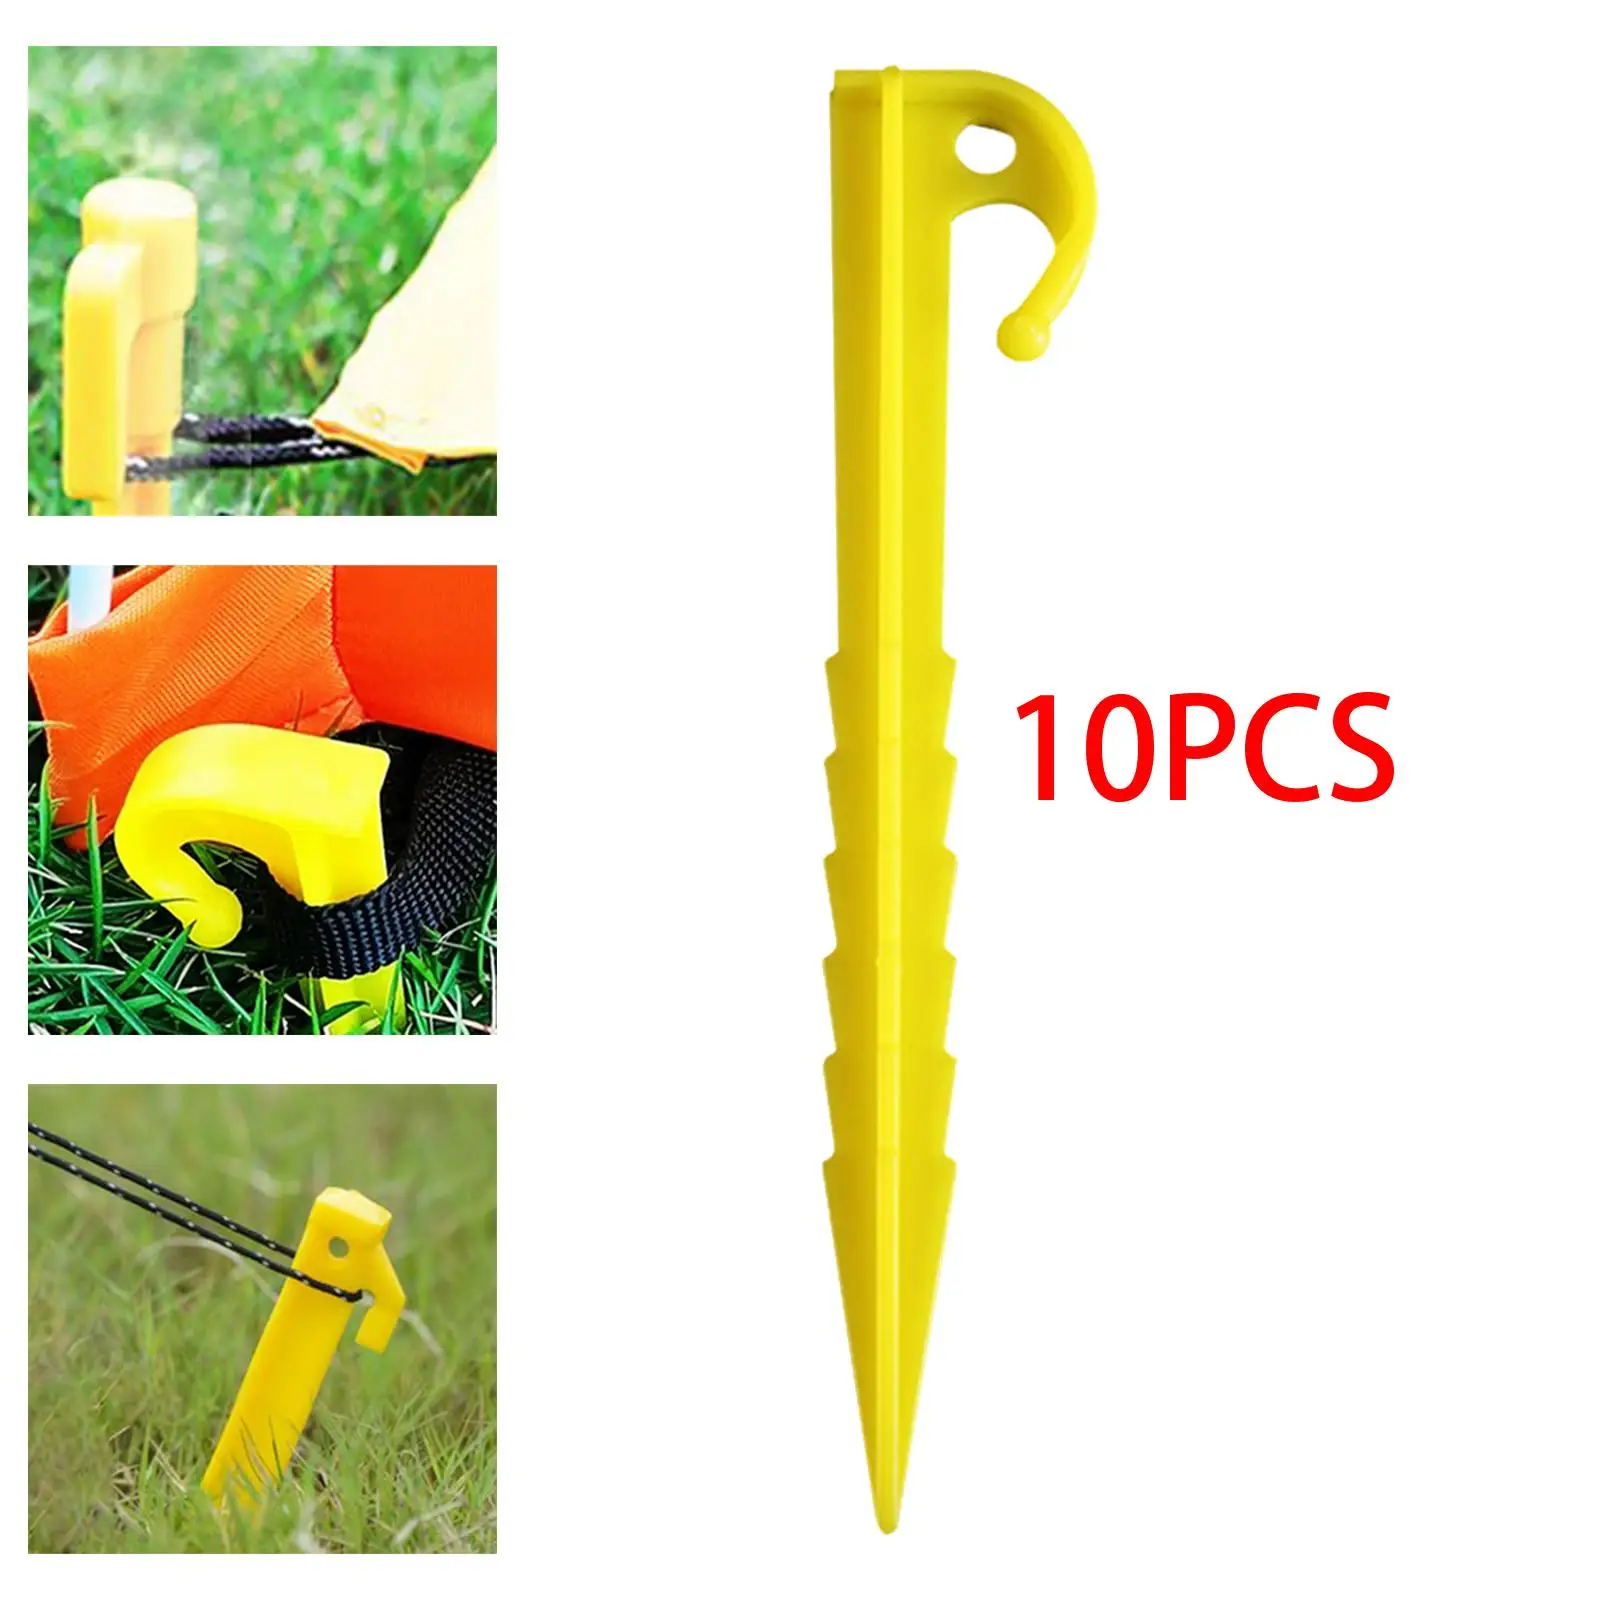 10x Portable Tent Pegs Stake Set Ground Nails Windproof Durable Ground Anchoring Pegs for Camping Hiking Picnic Canopy Accessory